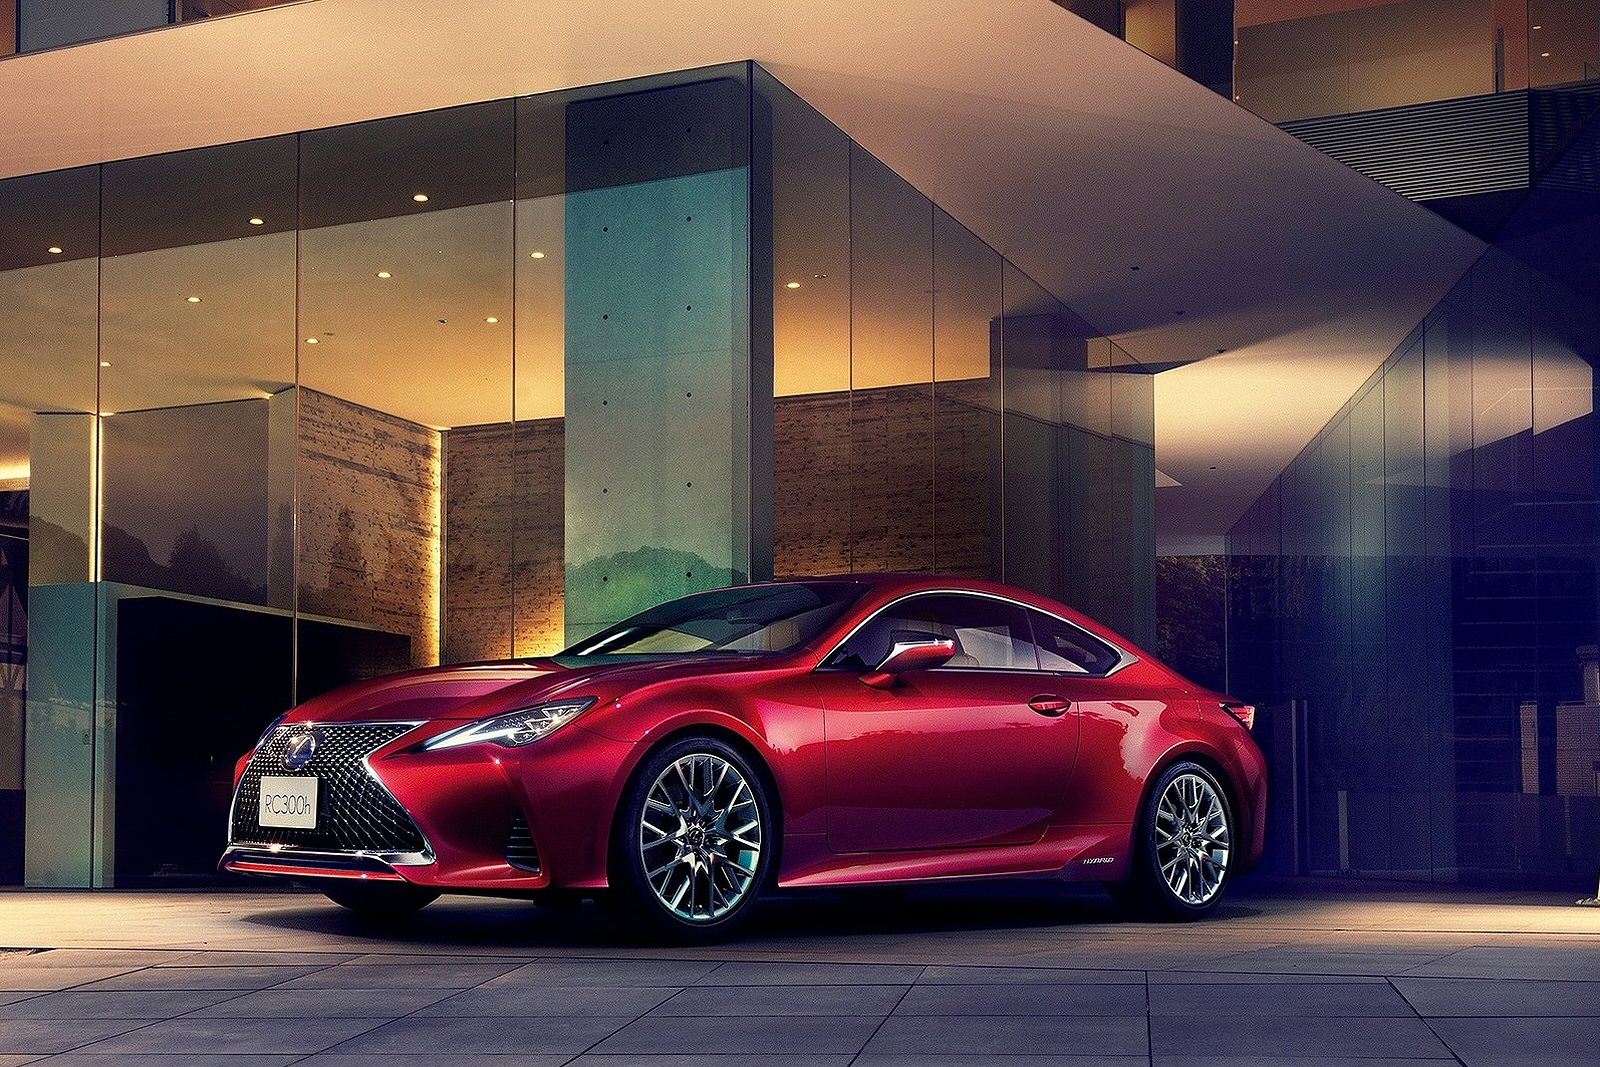 Classy Coupe Lexus Rc Range Independent New Review Ref 1245